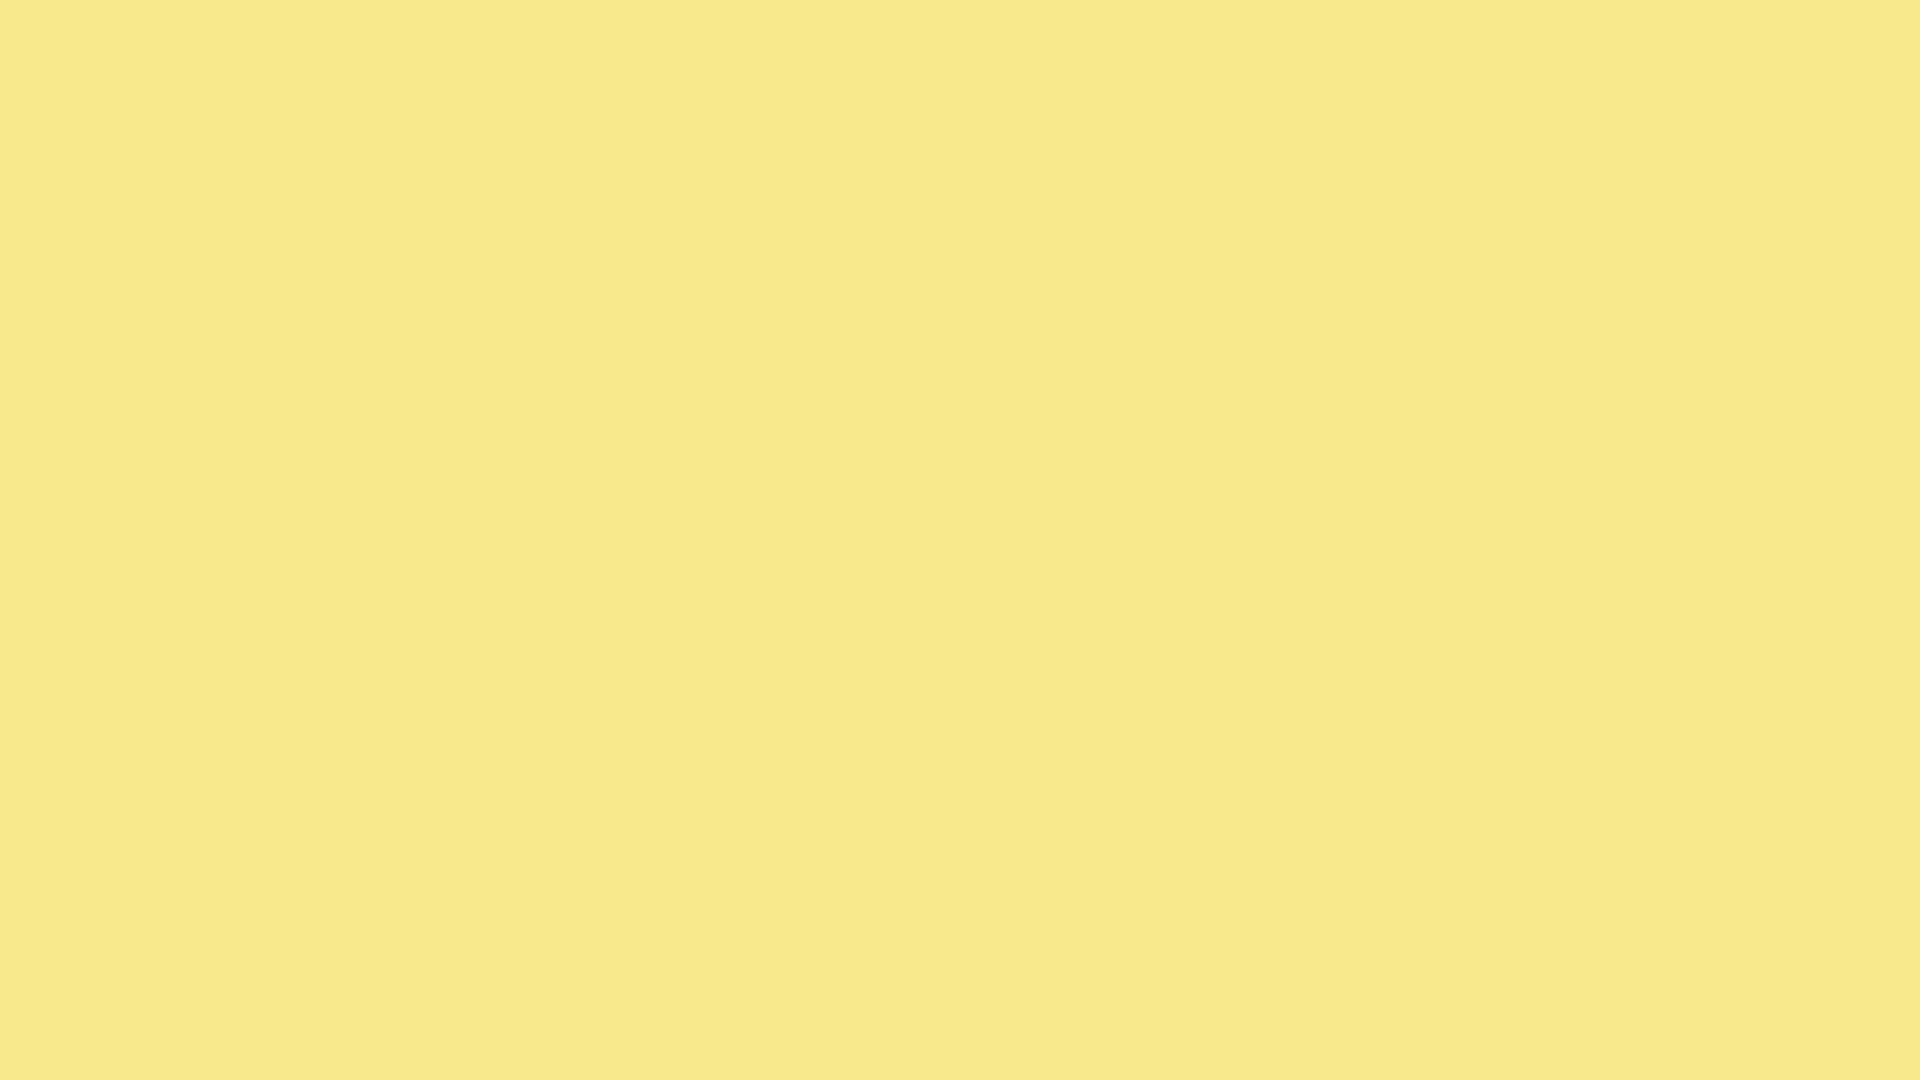 Solid Pastel Yellow Plain Zoom Background